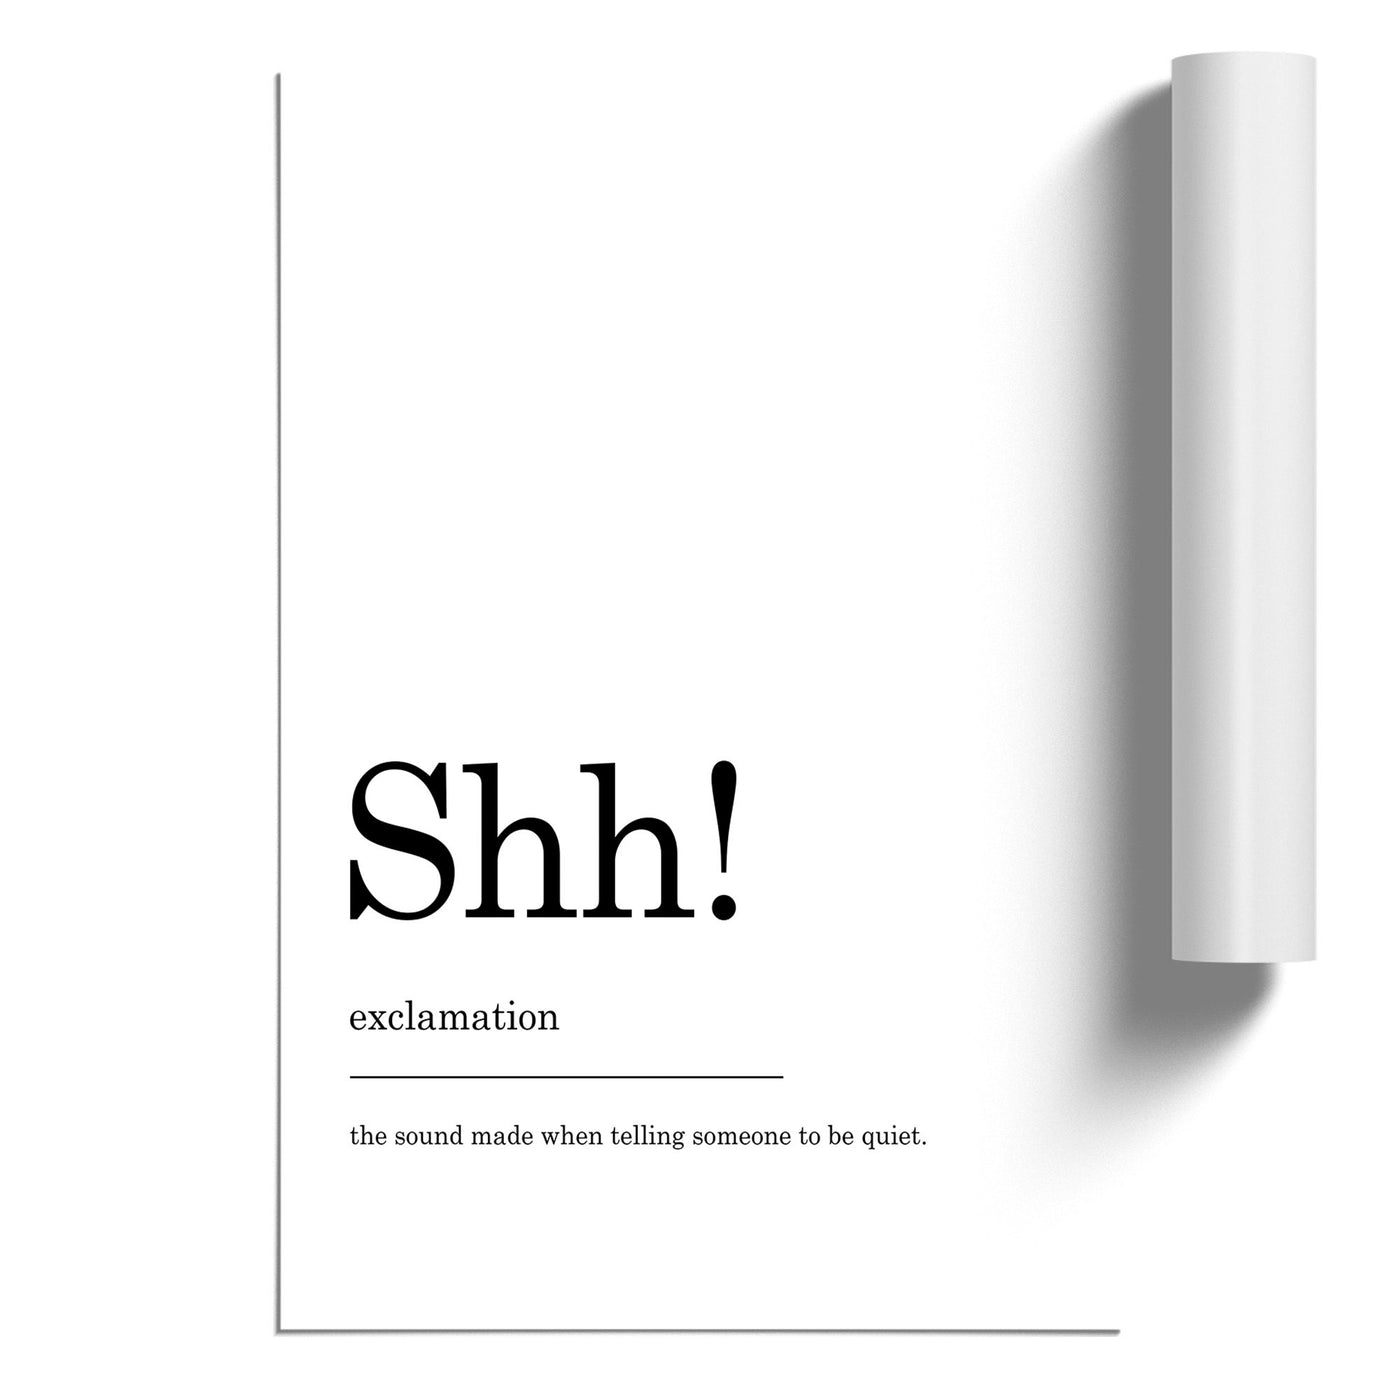 Definition of Shh